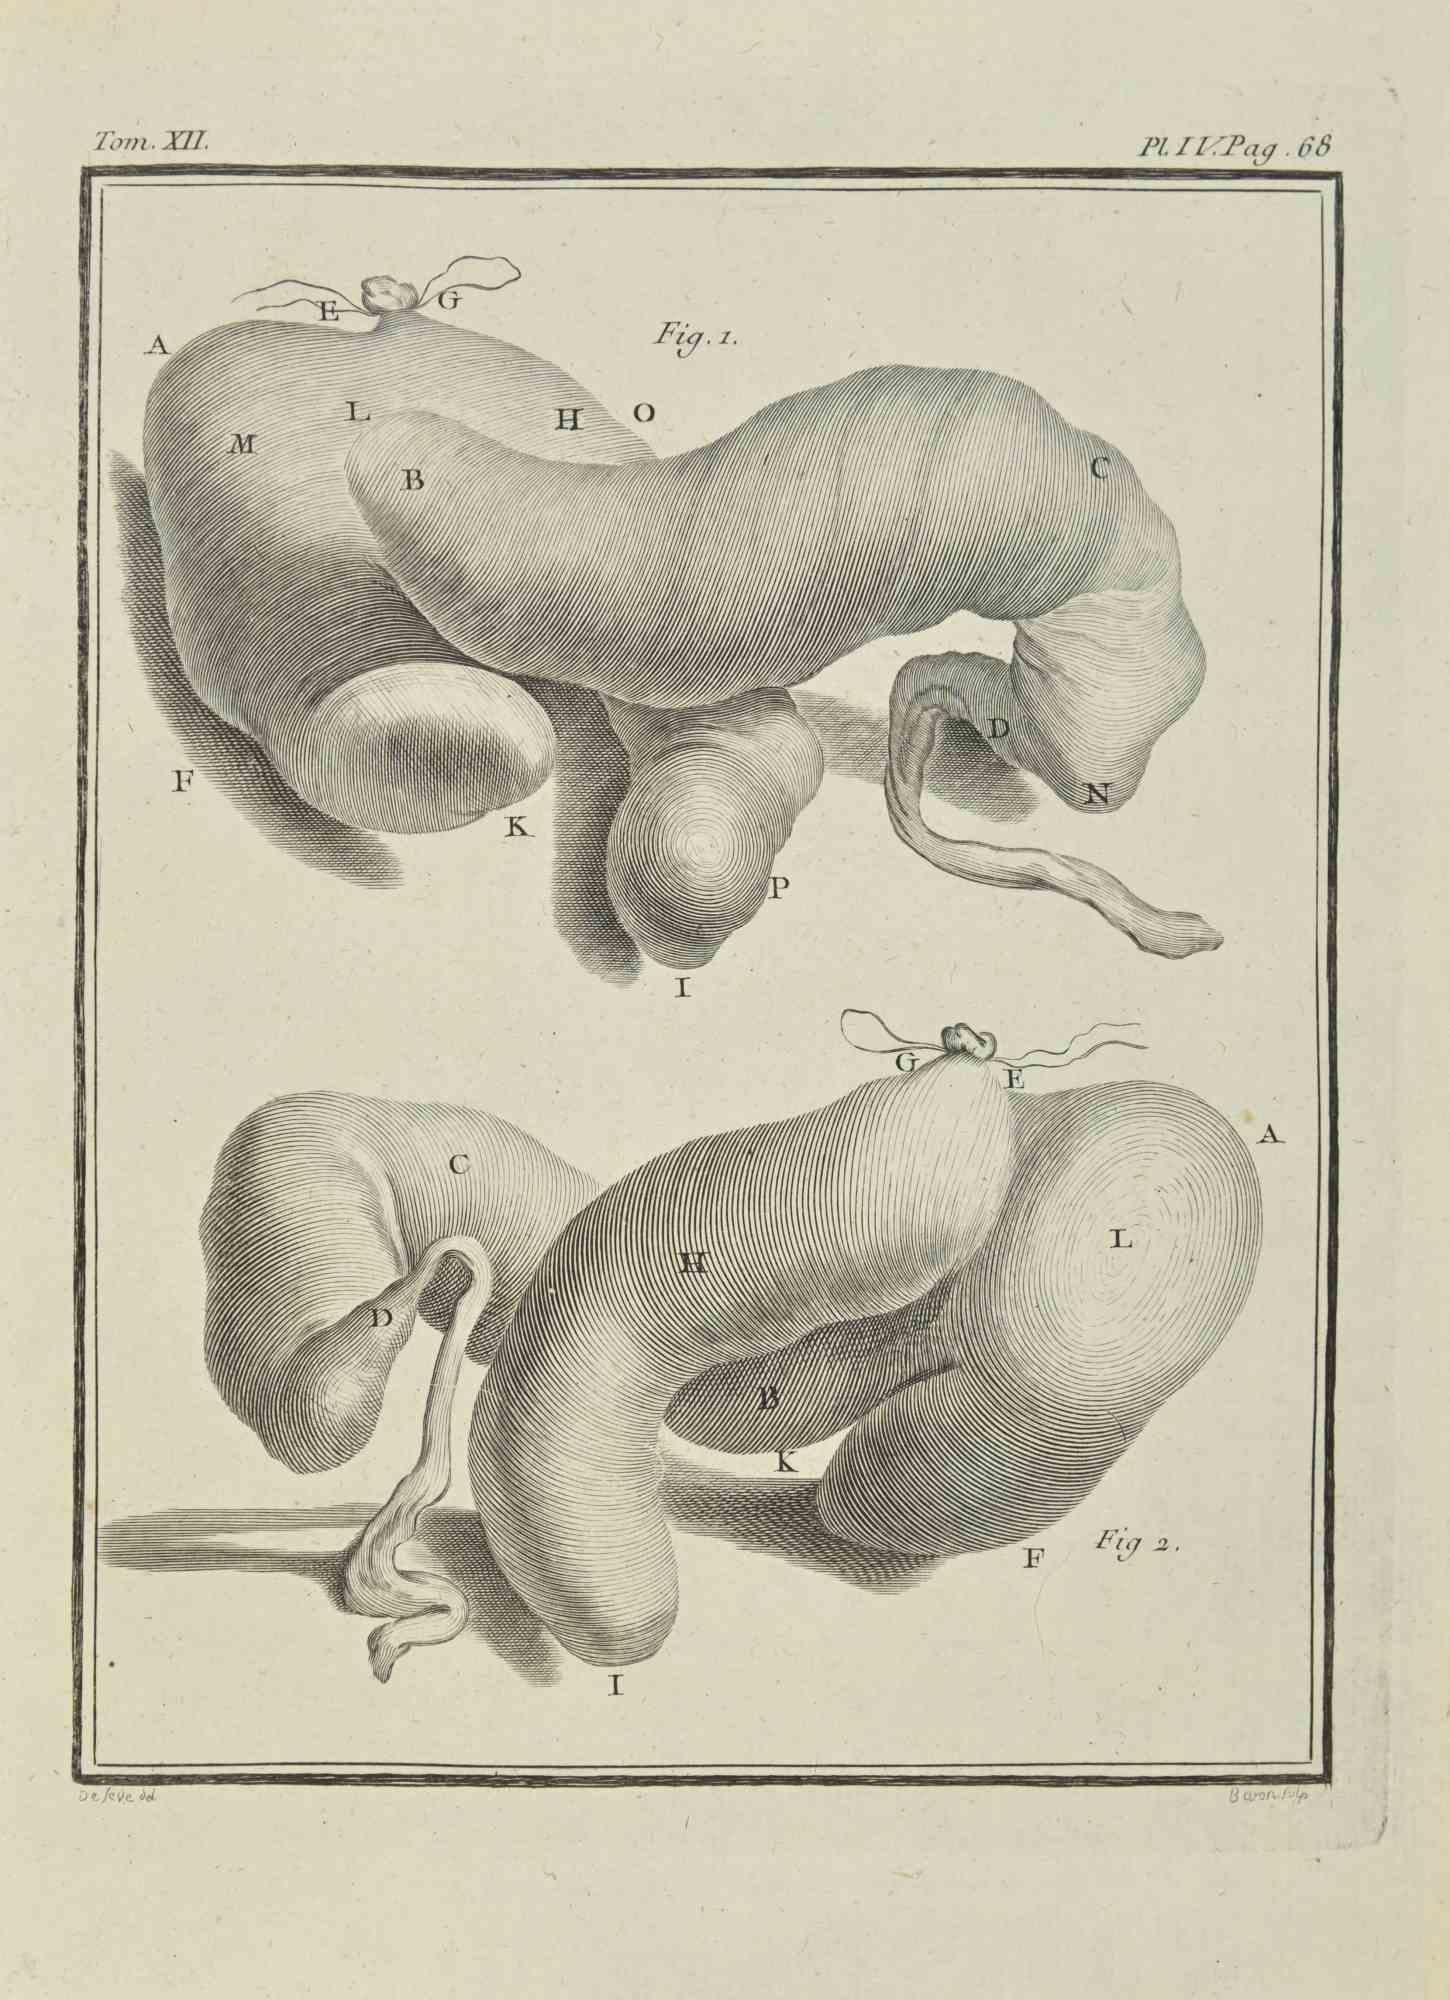 The Organs is an etching realized by Jacques Baron in 1771.

It belongs to the suite "Histoire Naturelle de Buffon".

The Artist's signature is engraved lower right.

Good conditions.